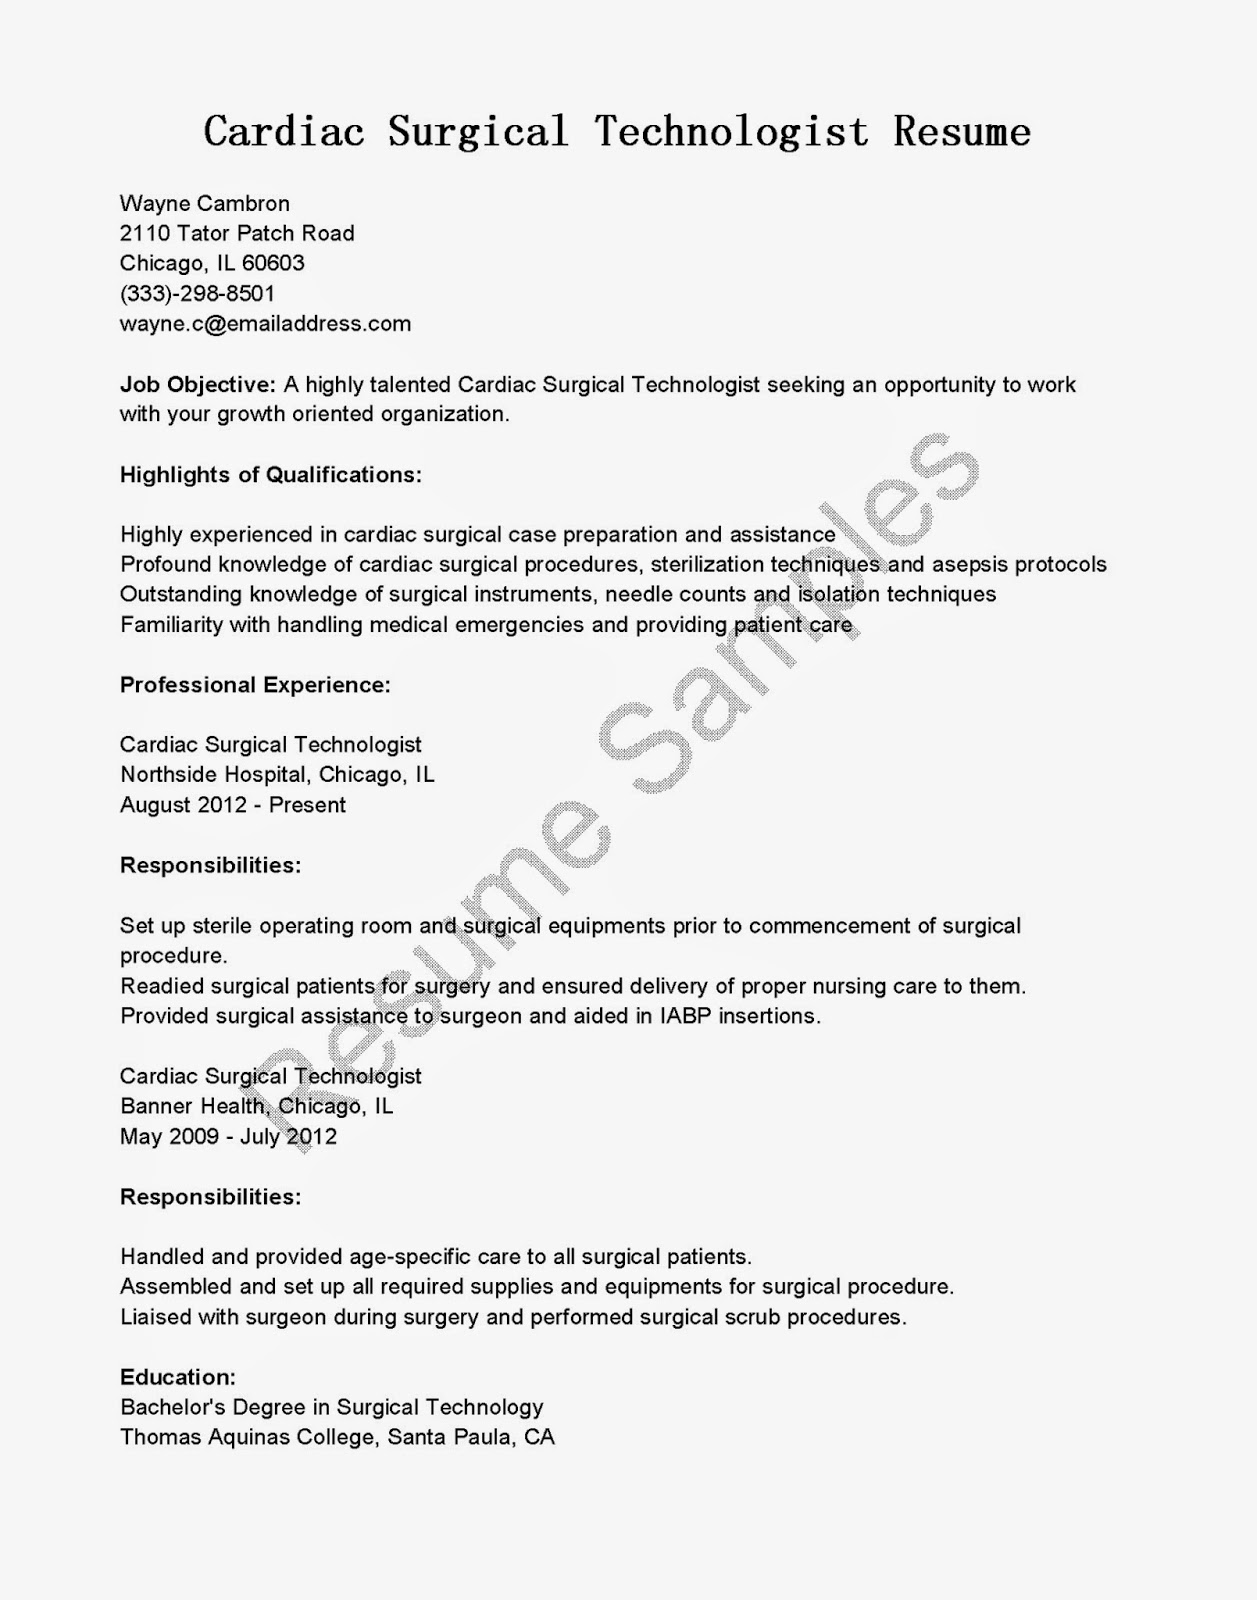 Auto body shop manager resume sample